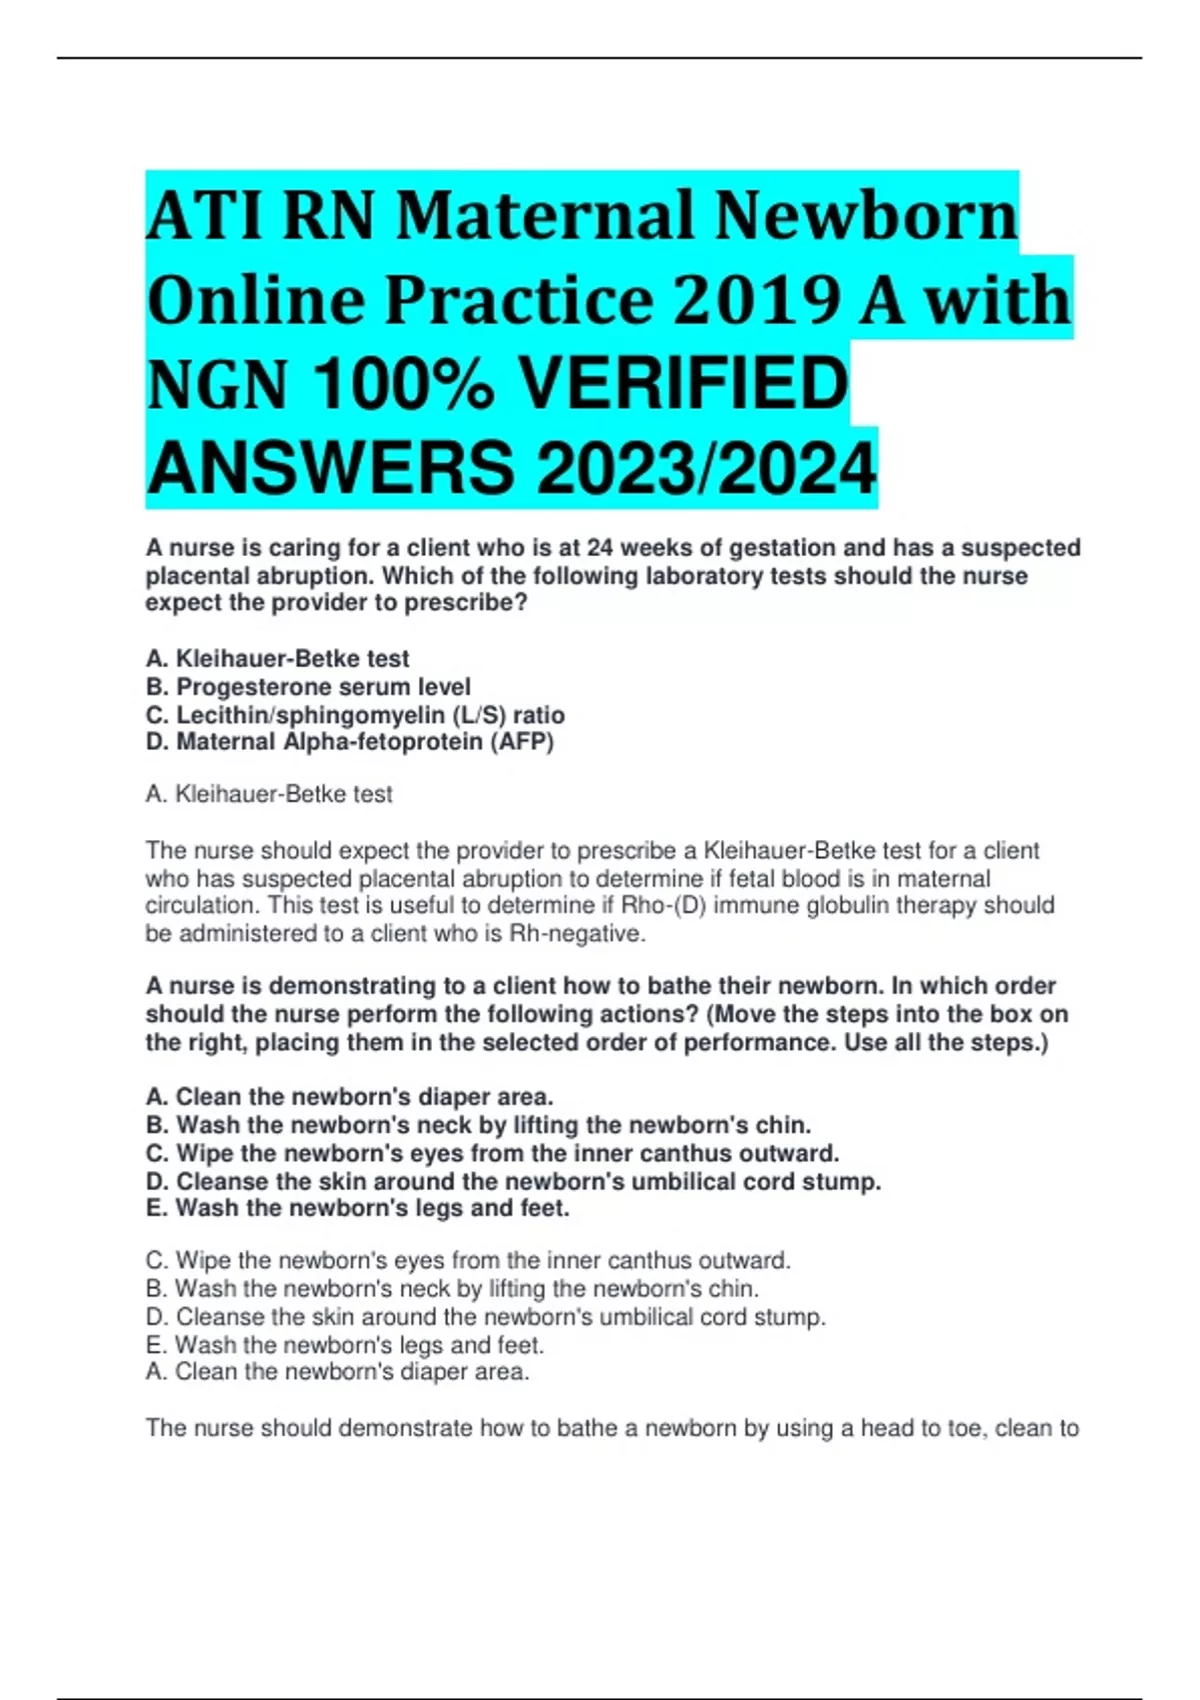 ATI RN Maternal Newborn Online Practice 2019 A with NGN 100 VERIFIED